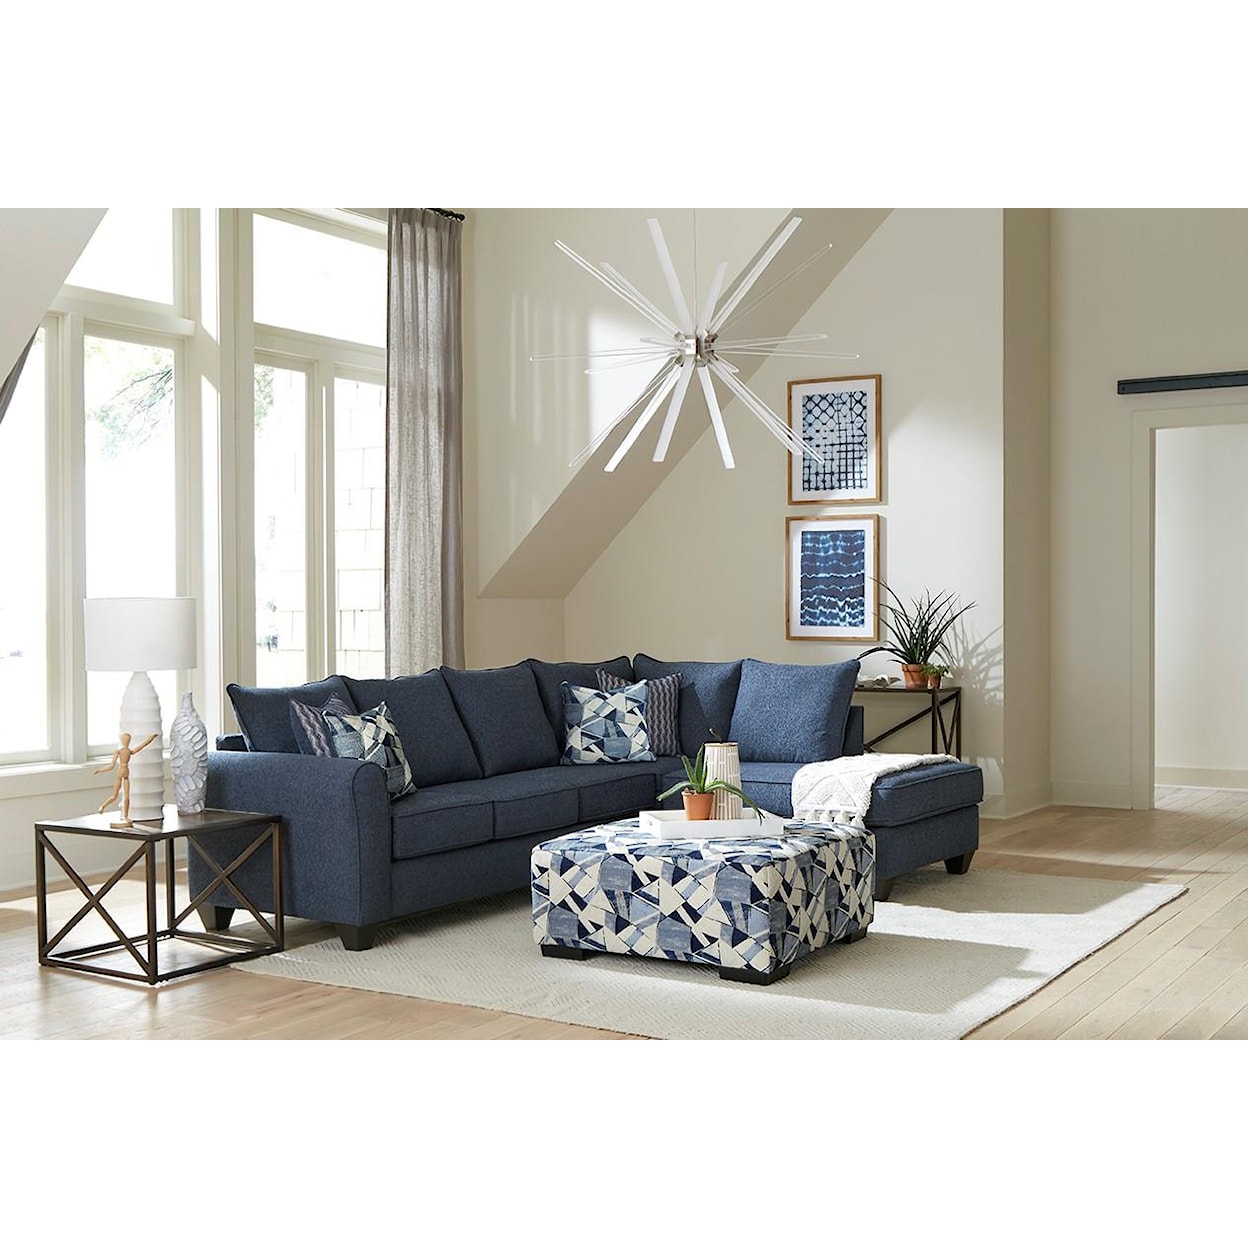 Albany 2520 Transitional Sofa with Chaise